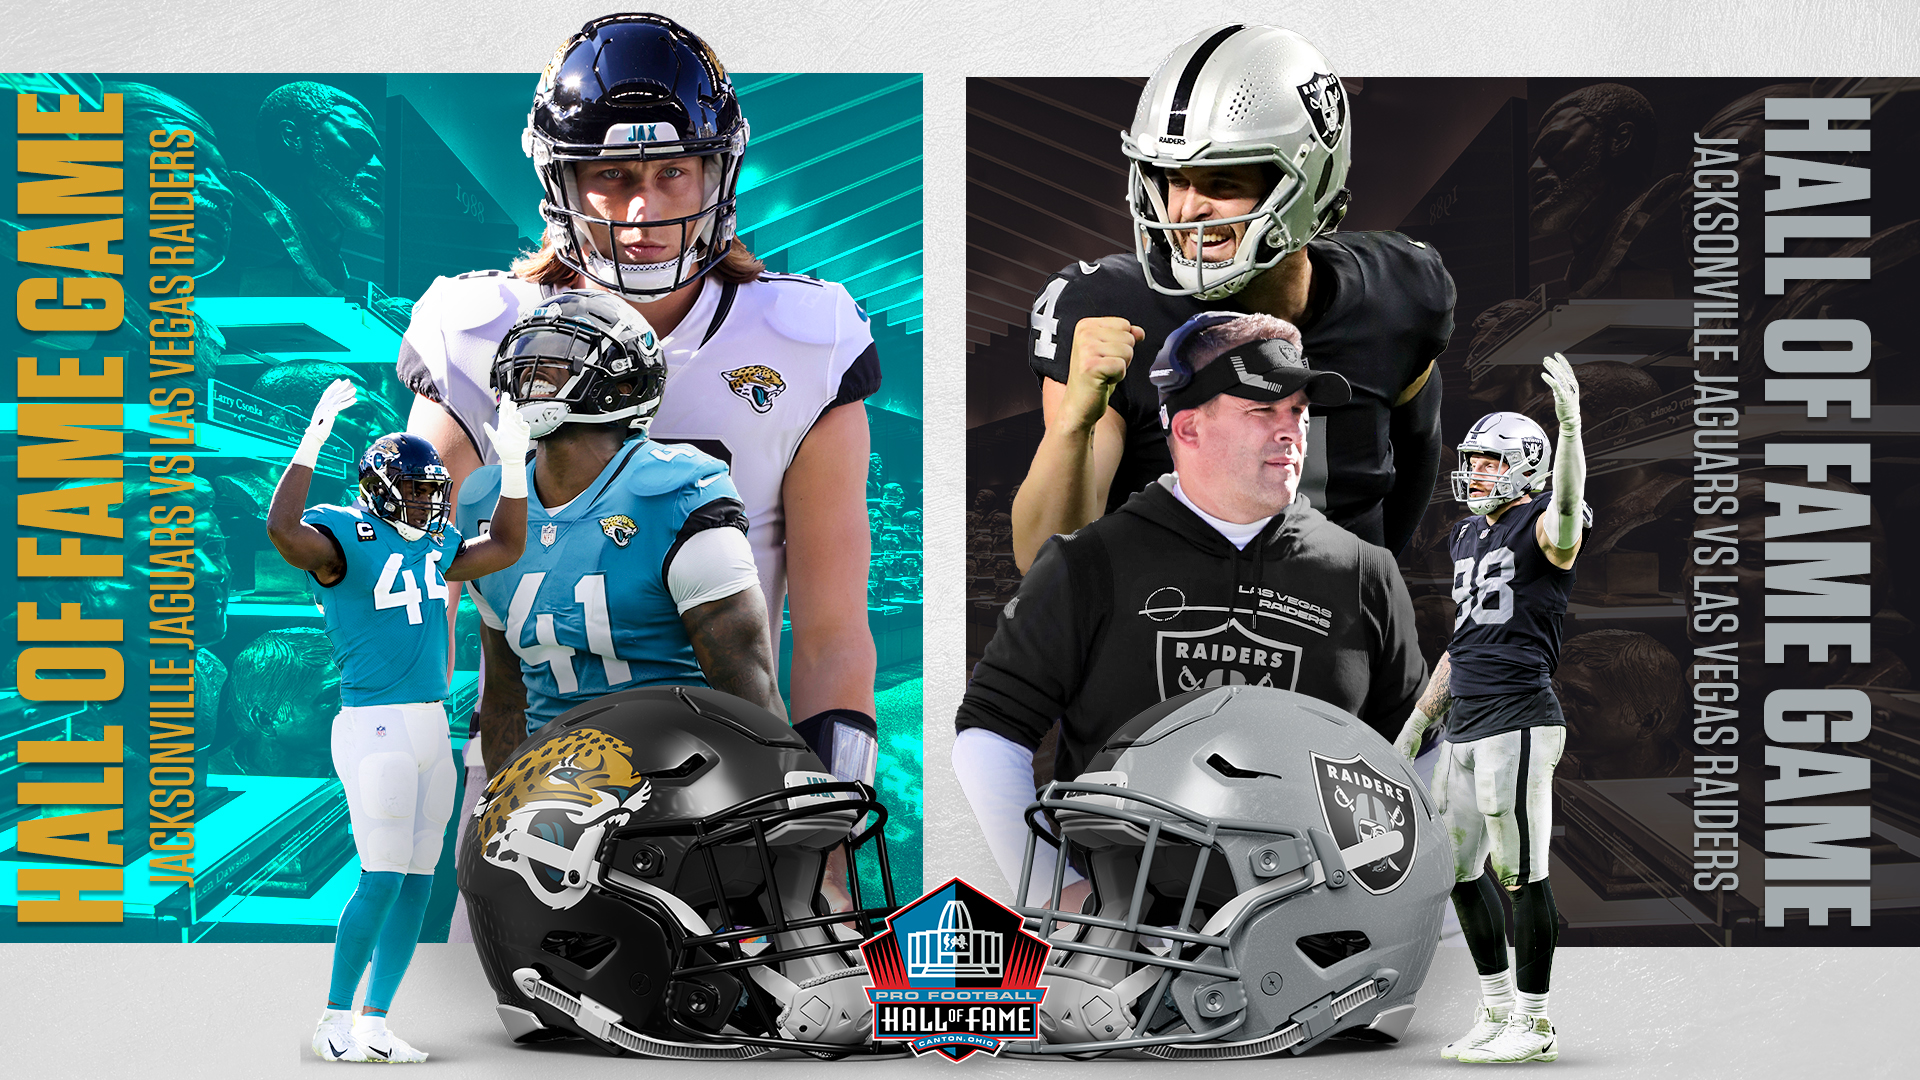 Raiders and Jaguars to Face Off in 2022 Hall of Fame Game